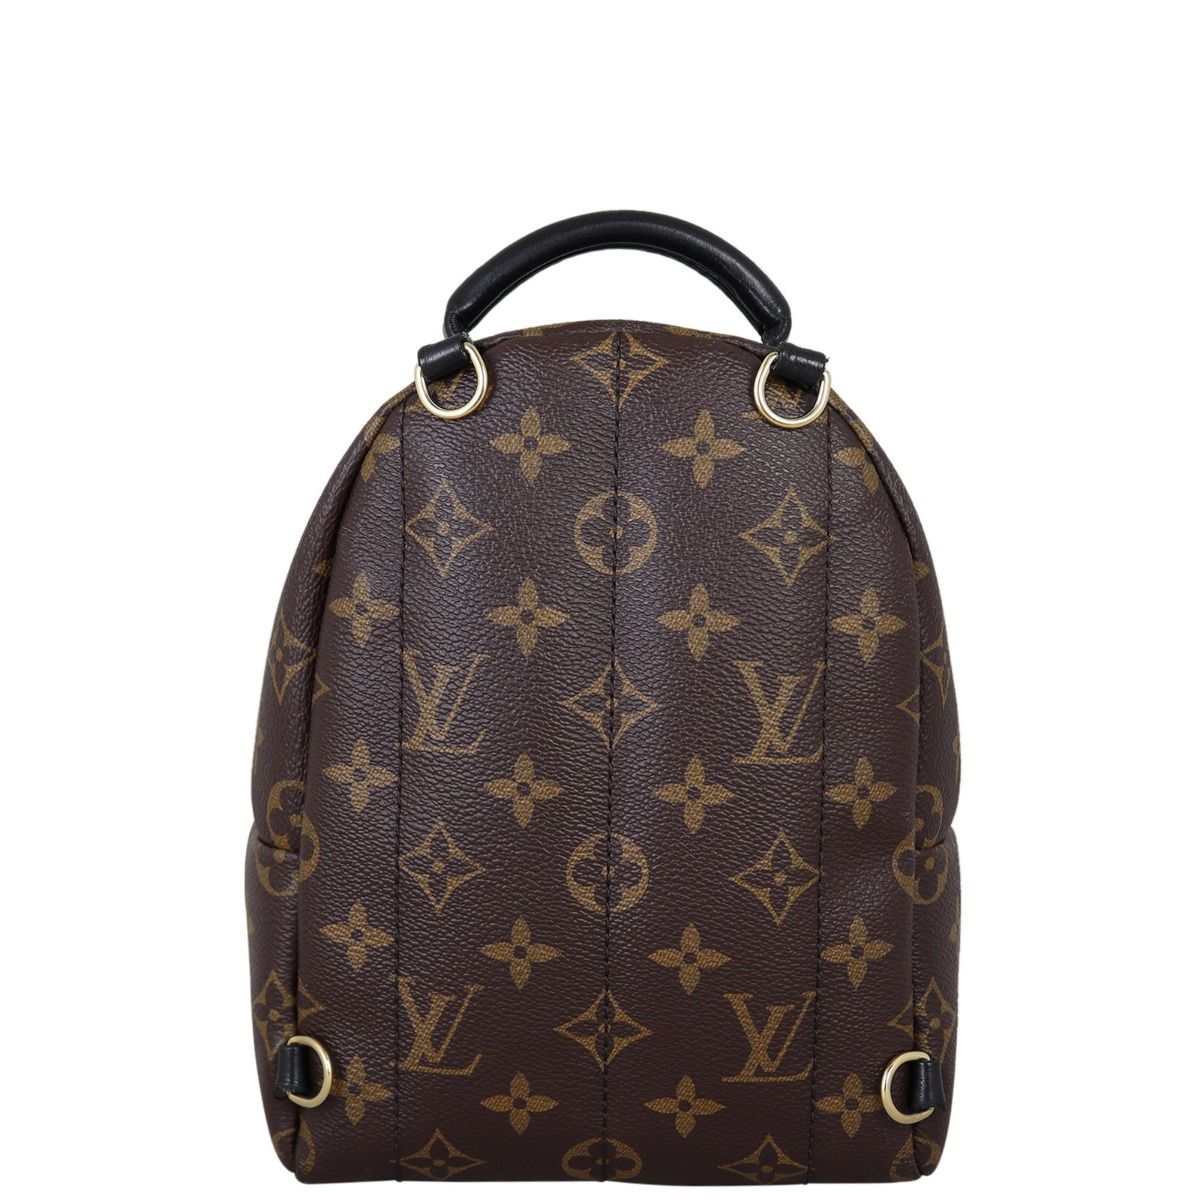 The Louis Vuitton Palm Springs Mini Backpack is one of the most